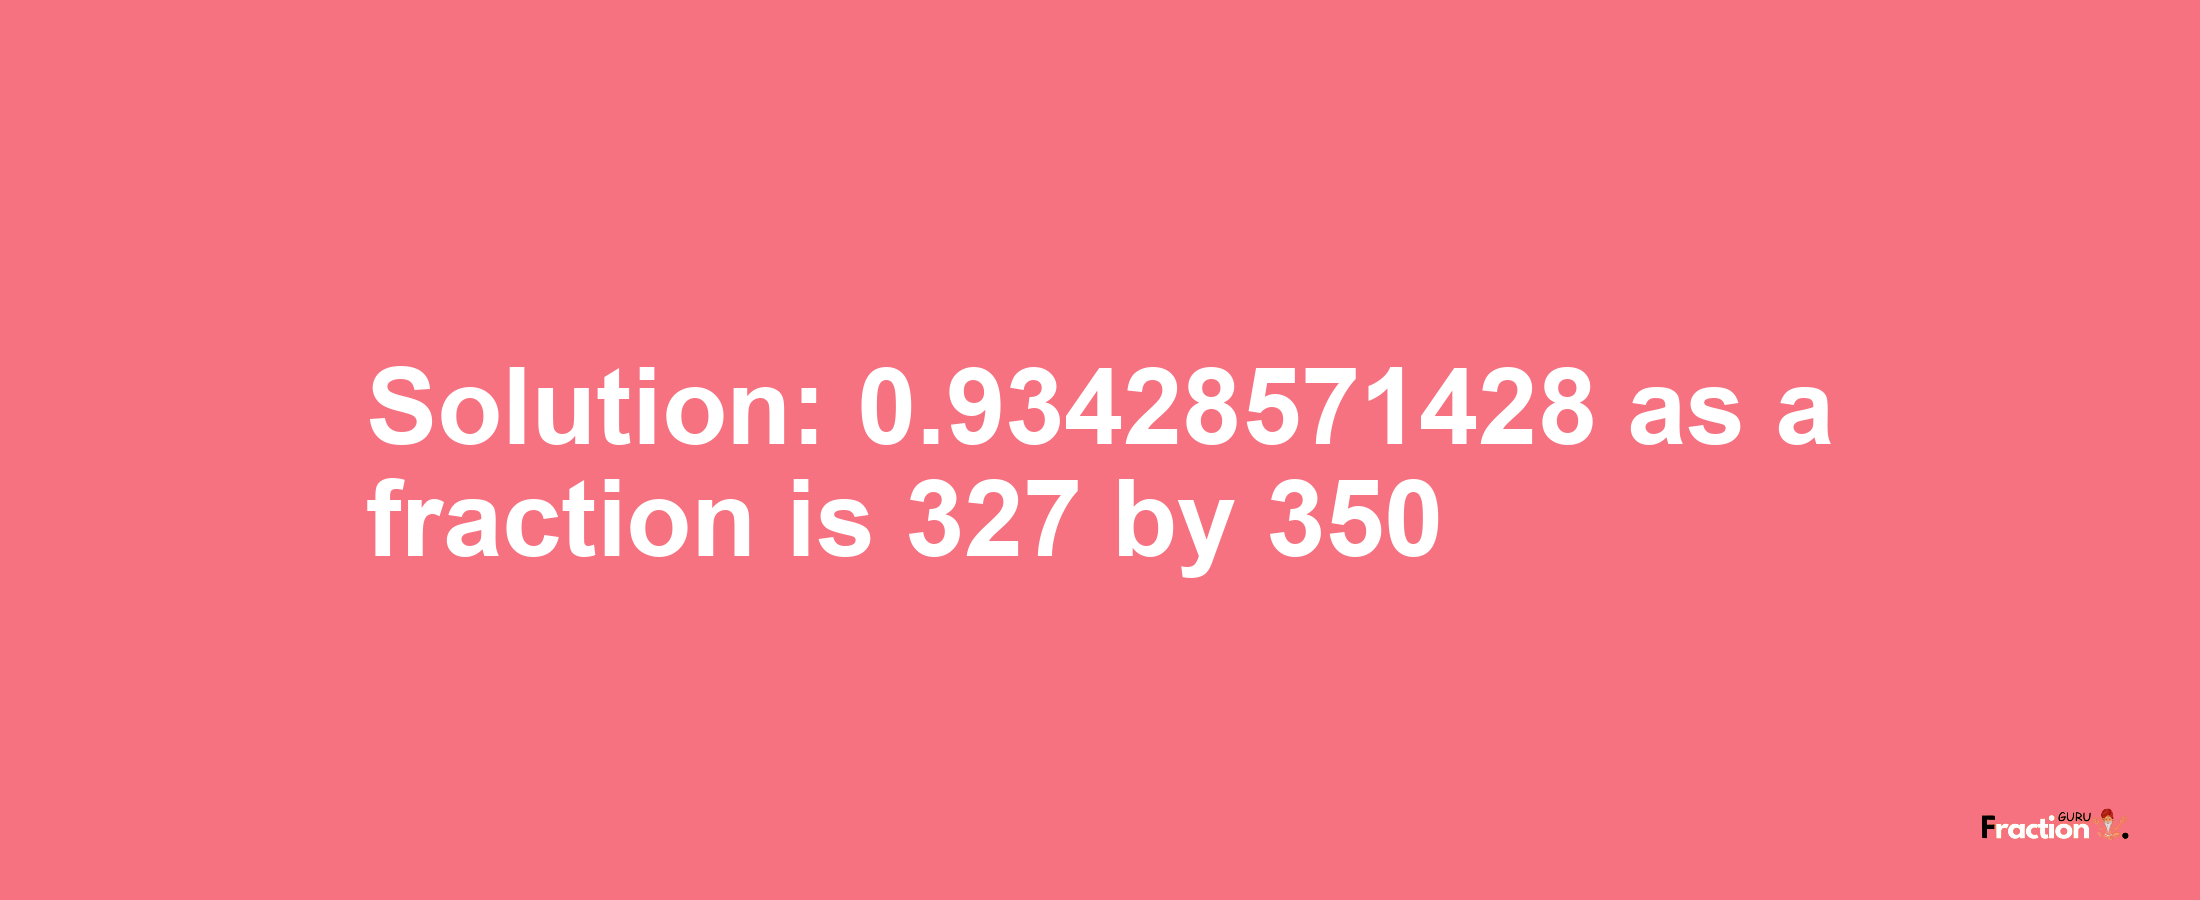 Solution:0.93428571428 as a fraction is 327/350